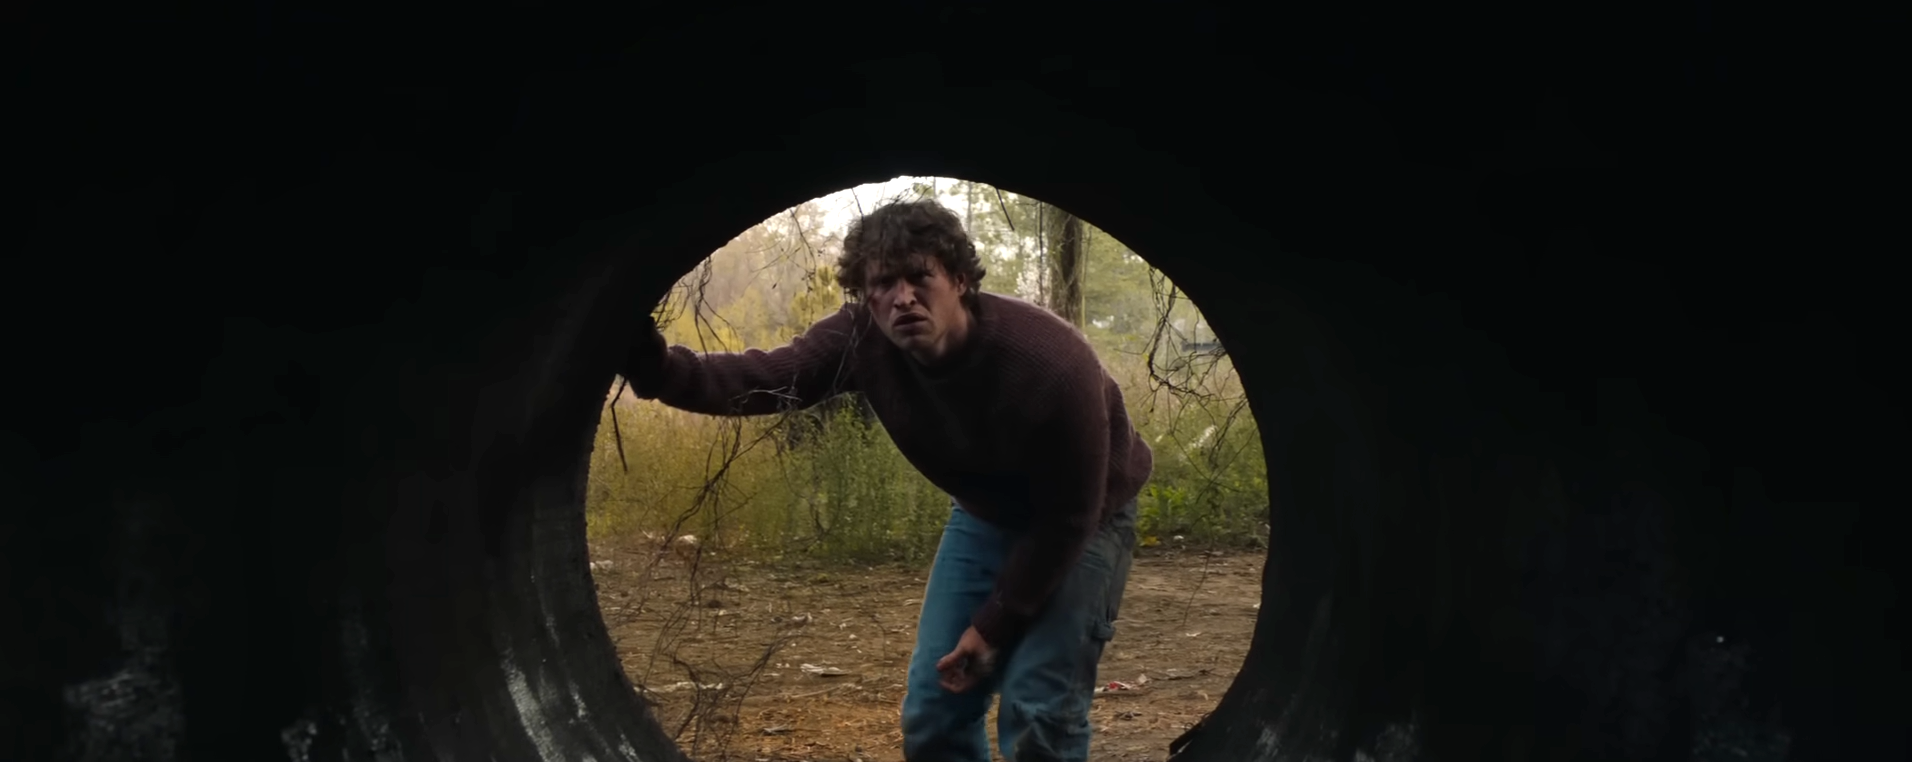 Corey looking in a sewer pipe